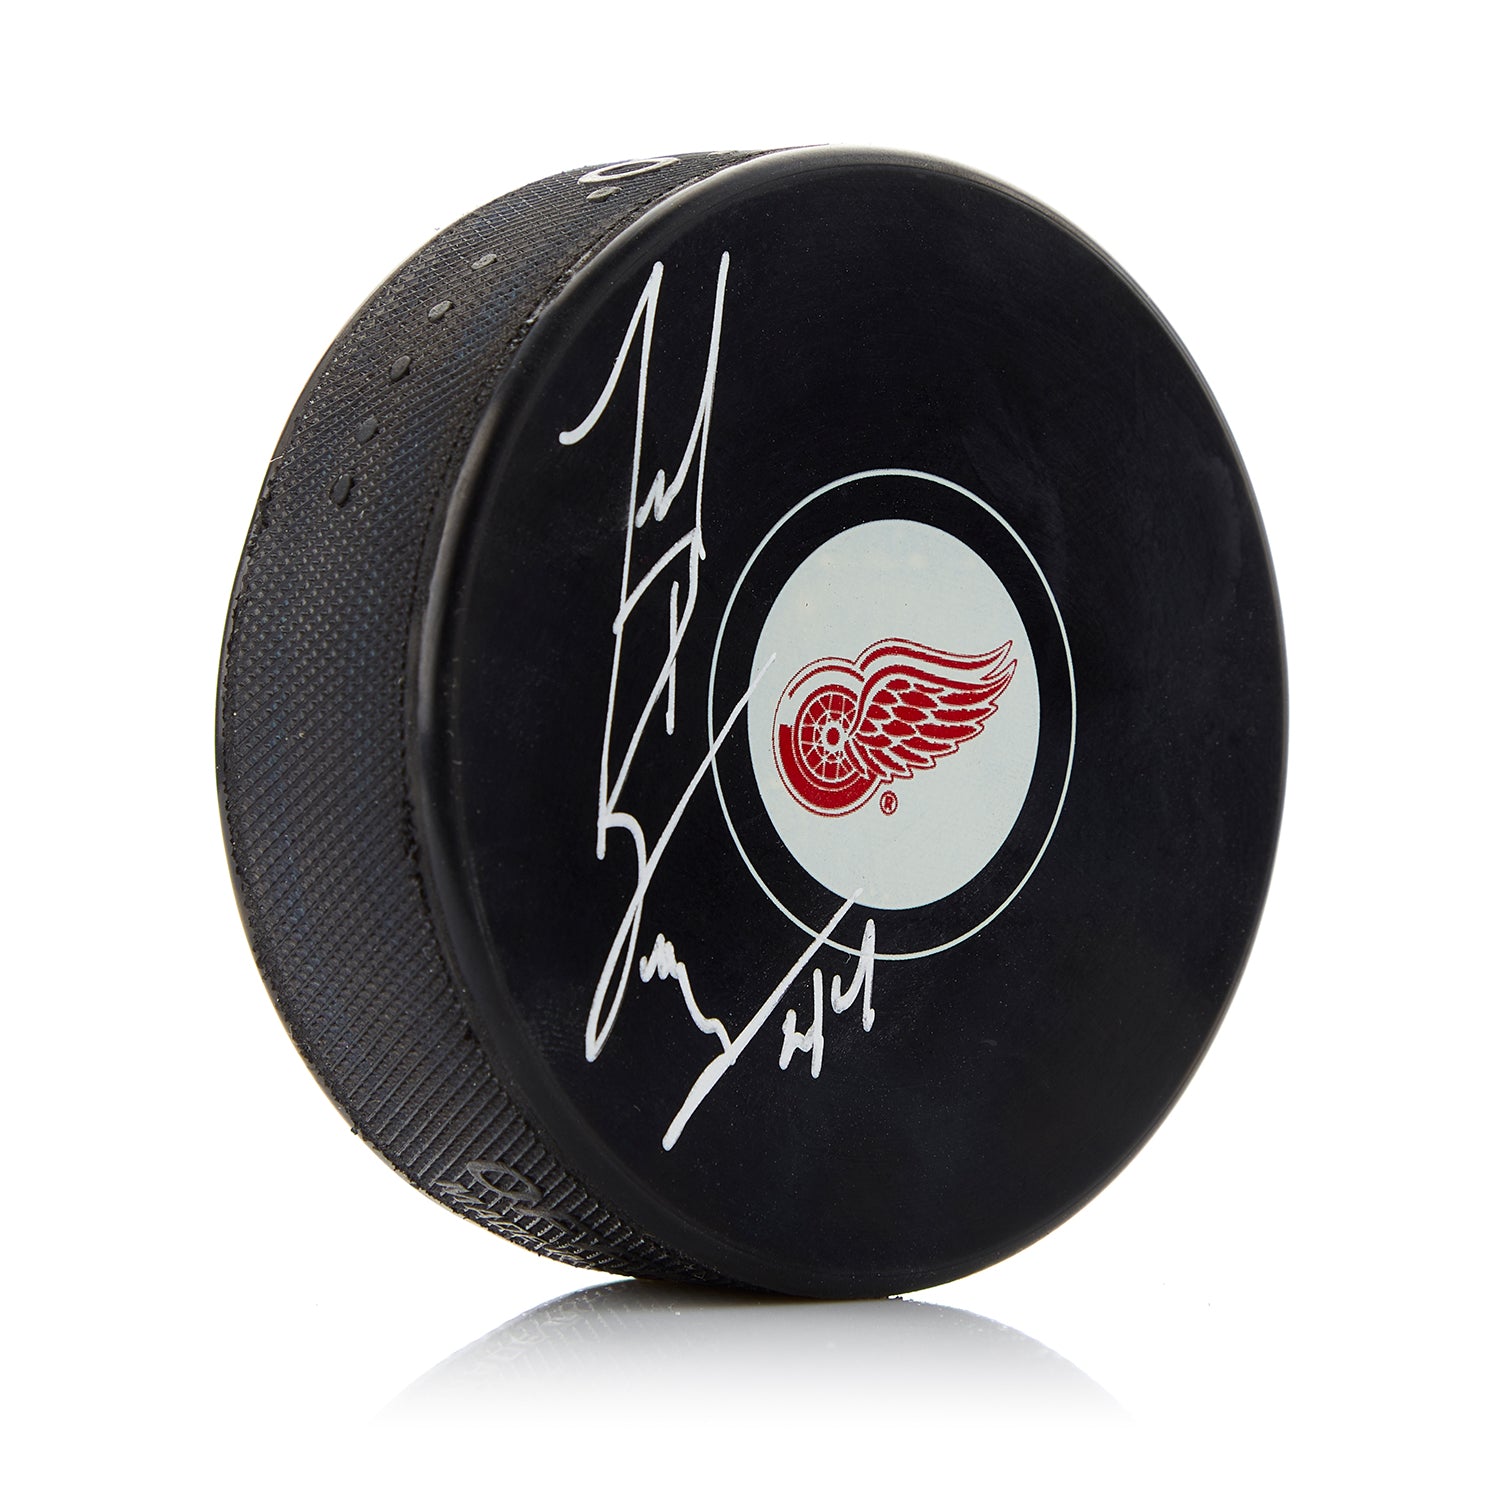 Todd Bertuzzi Detroit Red Wings Signed Autographed Hockey Puck